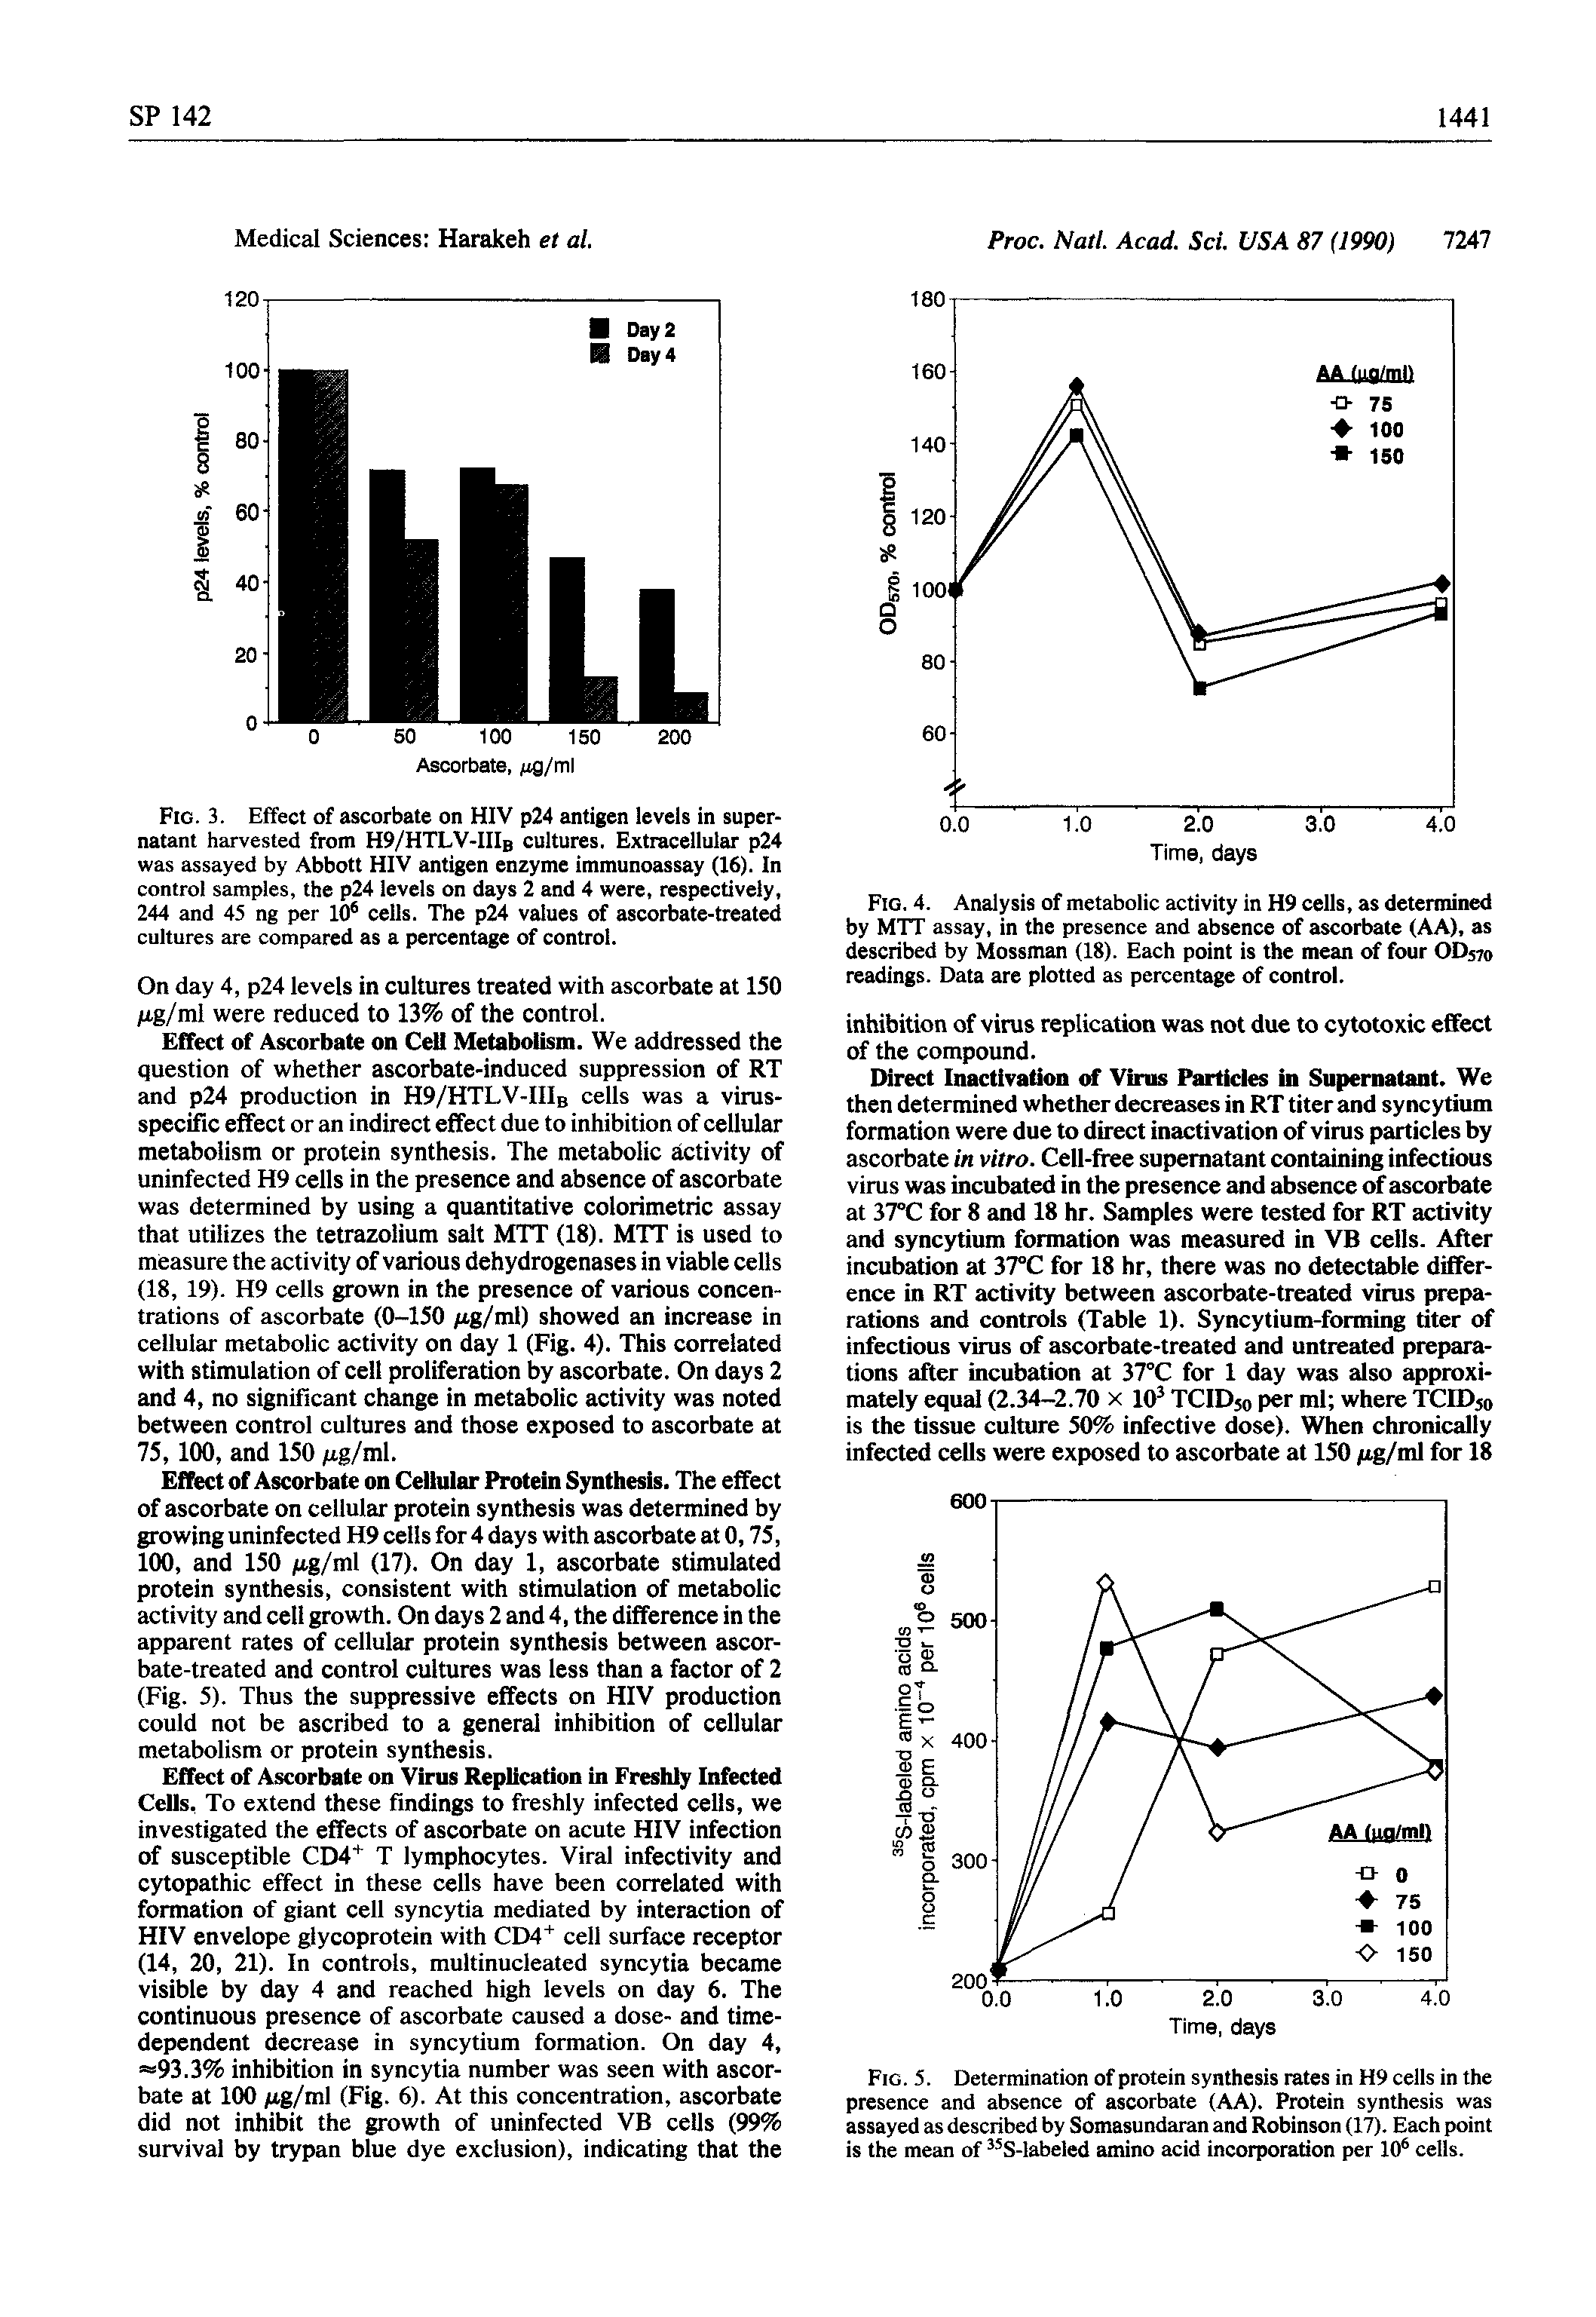 Fig. 5. Determination of protein synthesis rates in H9 ceils in the presence and absence of ascorbate (AA). Protein synthesis was assayed as described by Somasundaran and Robinson (17). Each point is the mean of S-labeled amino acid incorporation per 10 cells.